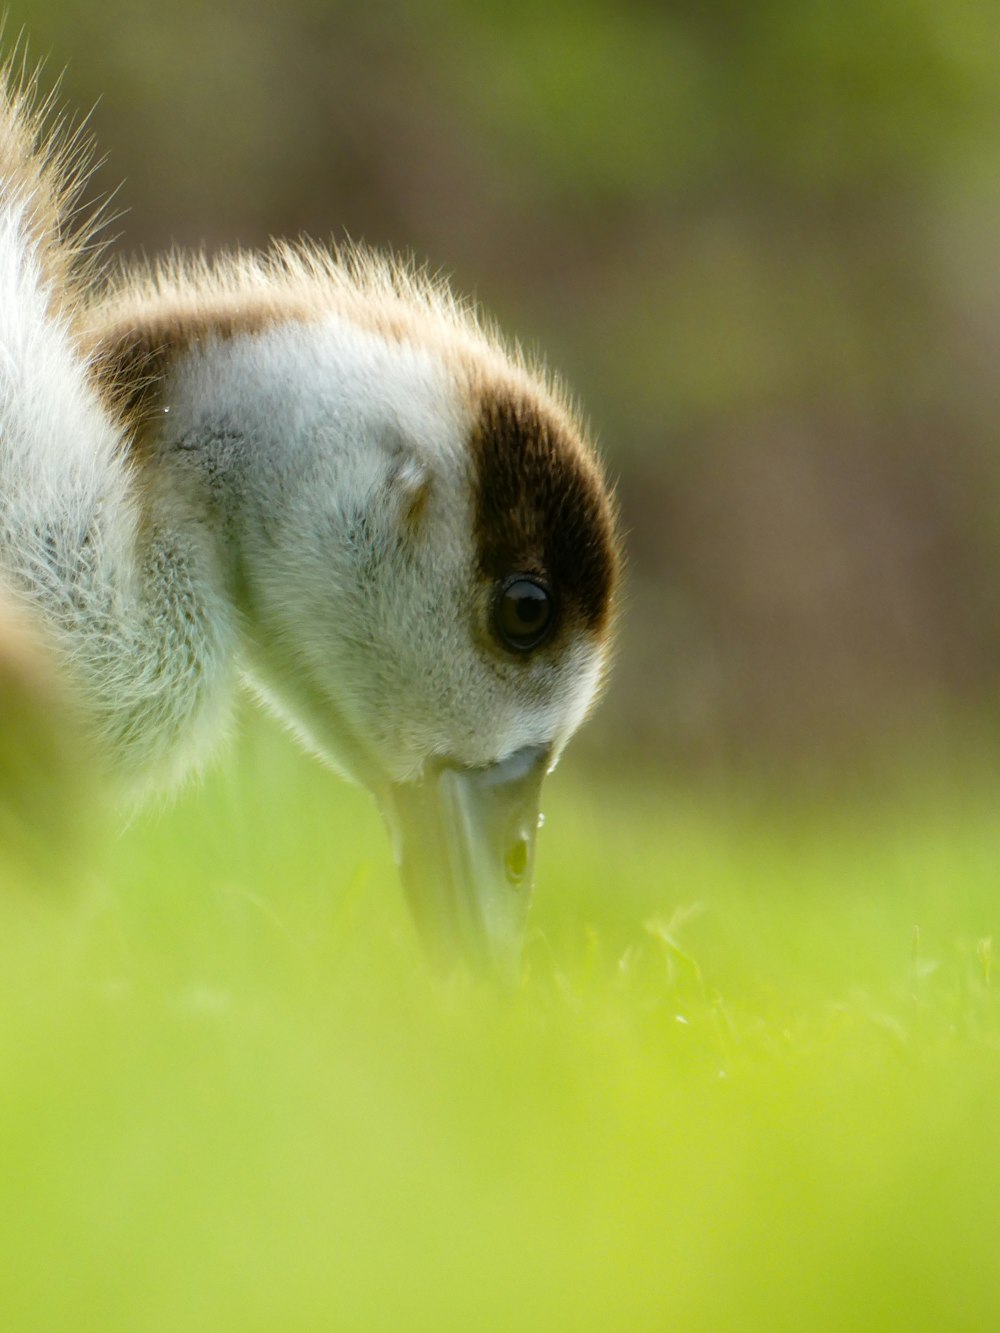 a close up of a small animal in the grass